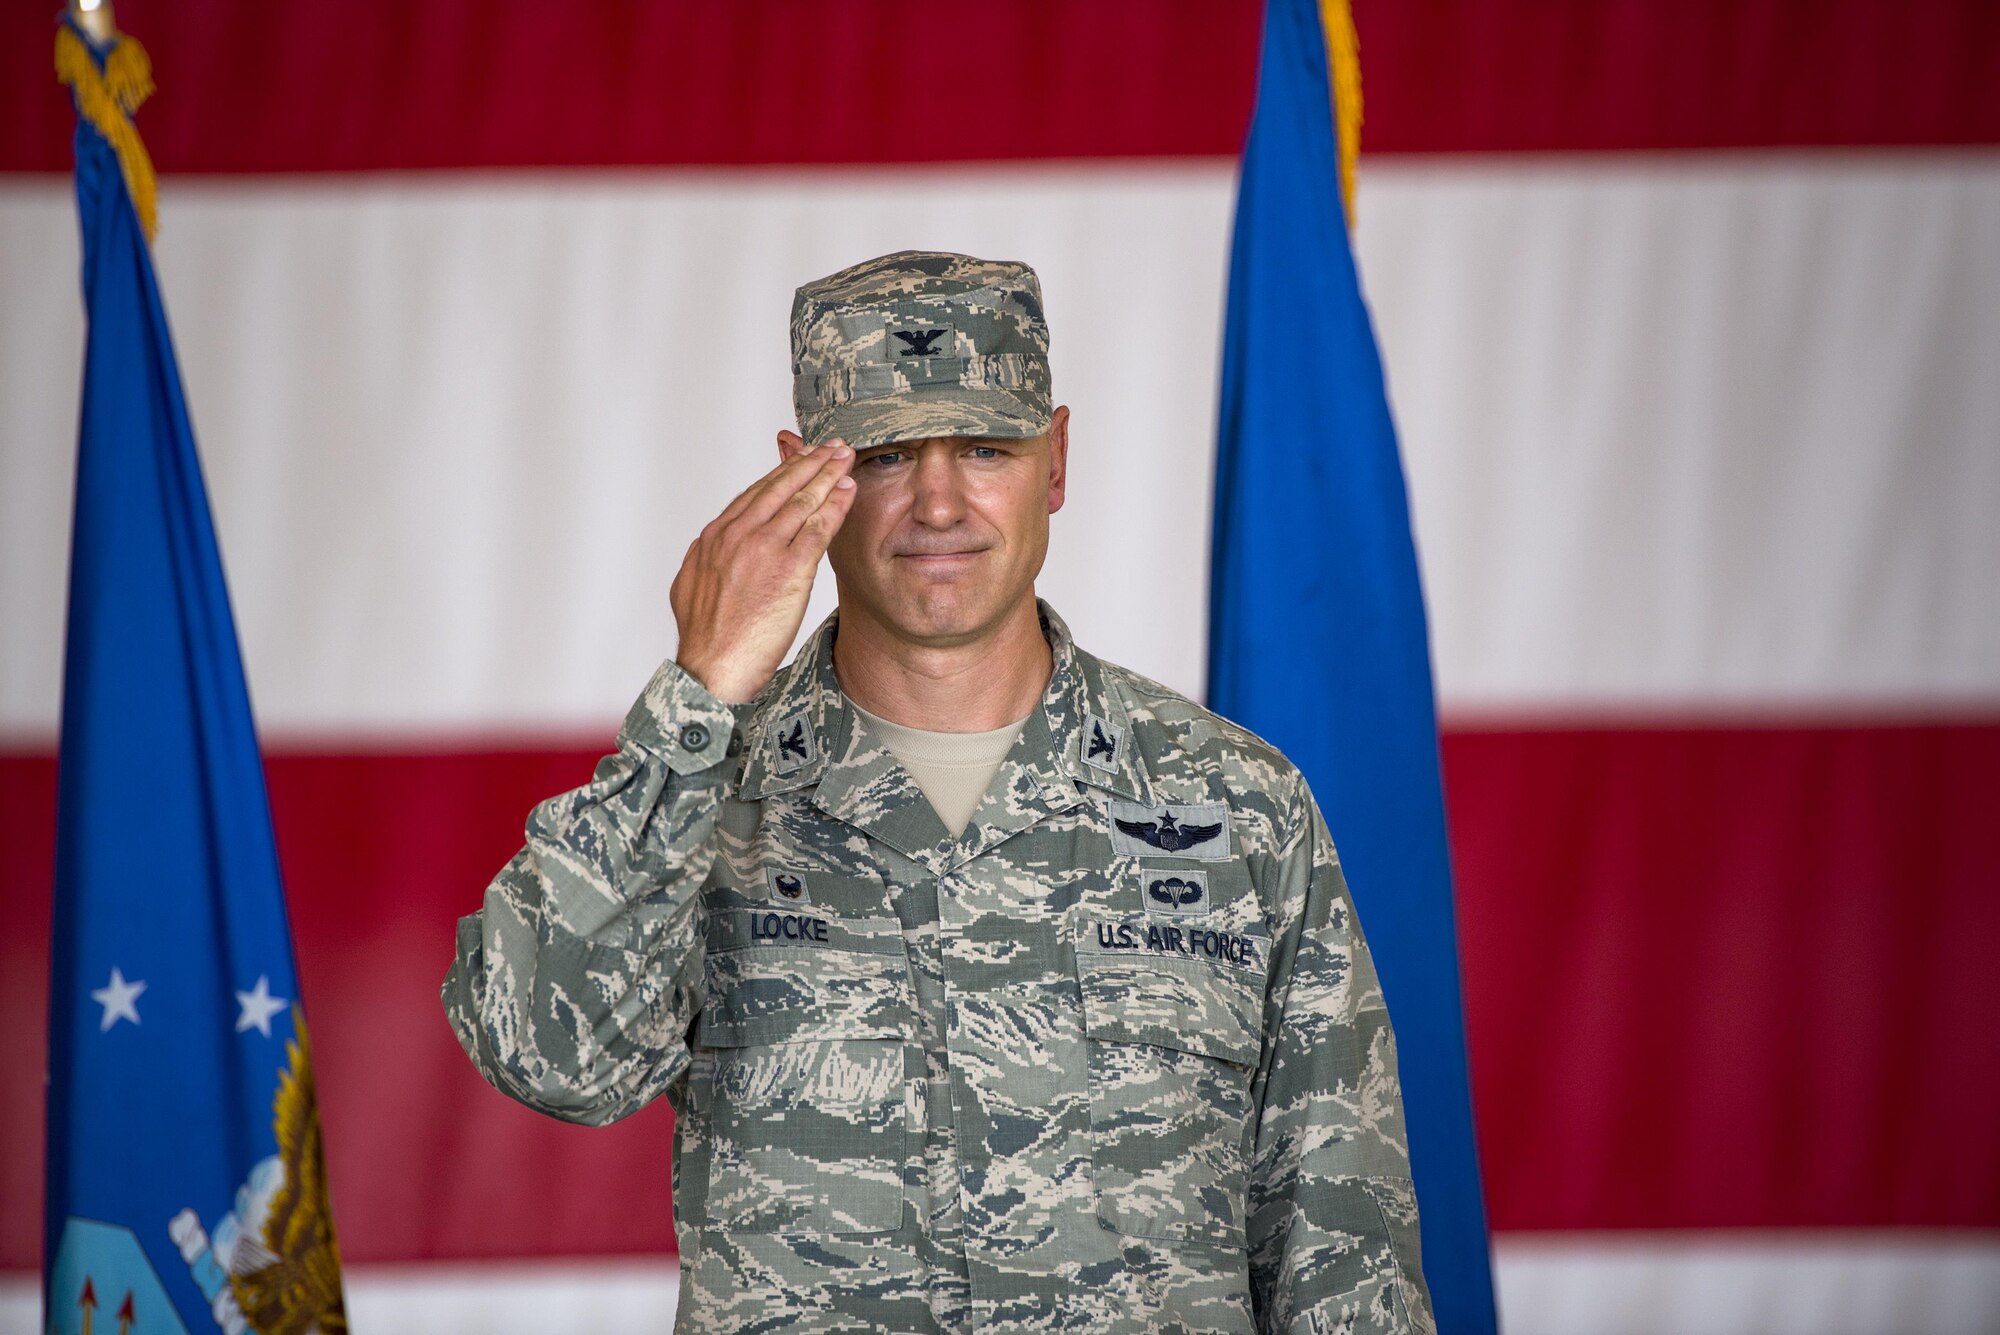 U.S. Air Force Col. Joseph Locke, 93d Air Ground Operations Wing commander, renders his final salute during a change of command ceremony, June 28, 2016 at Moody Air Force Base, Ga. After relinquishing command Locke will deploy to Southwest Asia where he will fly the A-29 Super Tucano.   (U.S. Air Force photo by Senior Airman Ryan Callaghan/Released)